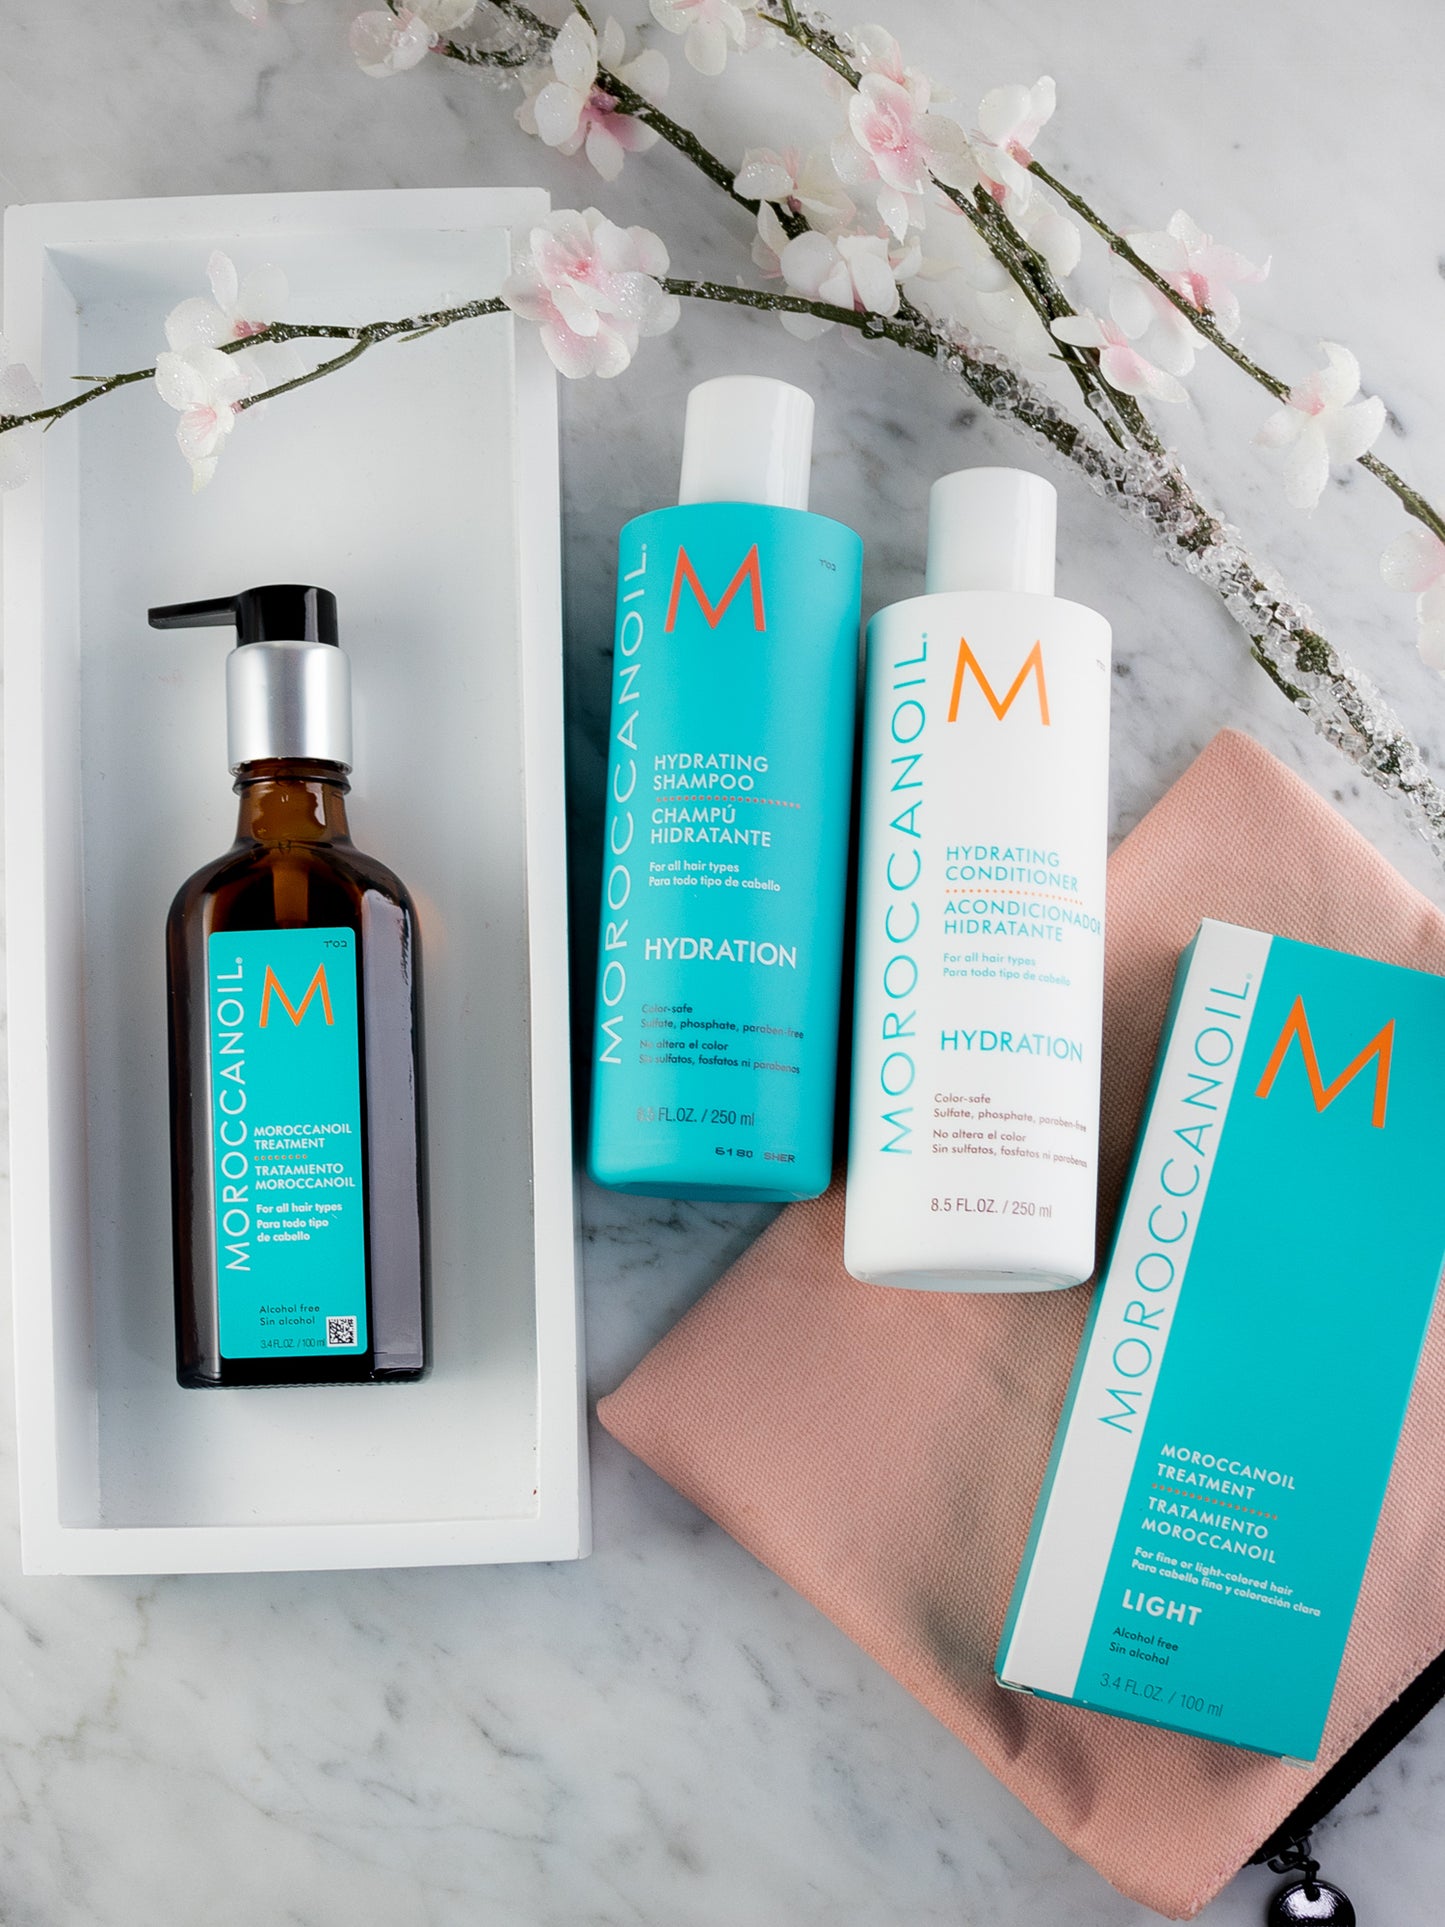 Shop Hydrating Shampoos for All Hair Types - Moroccanoil